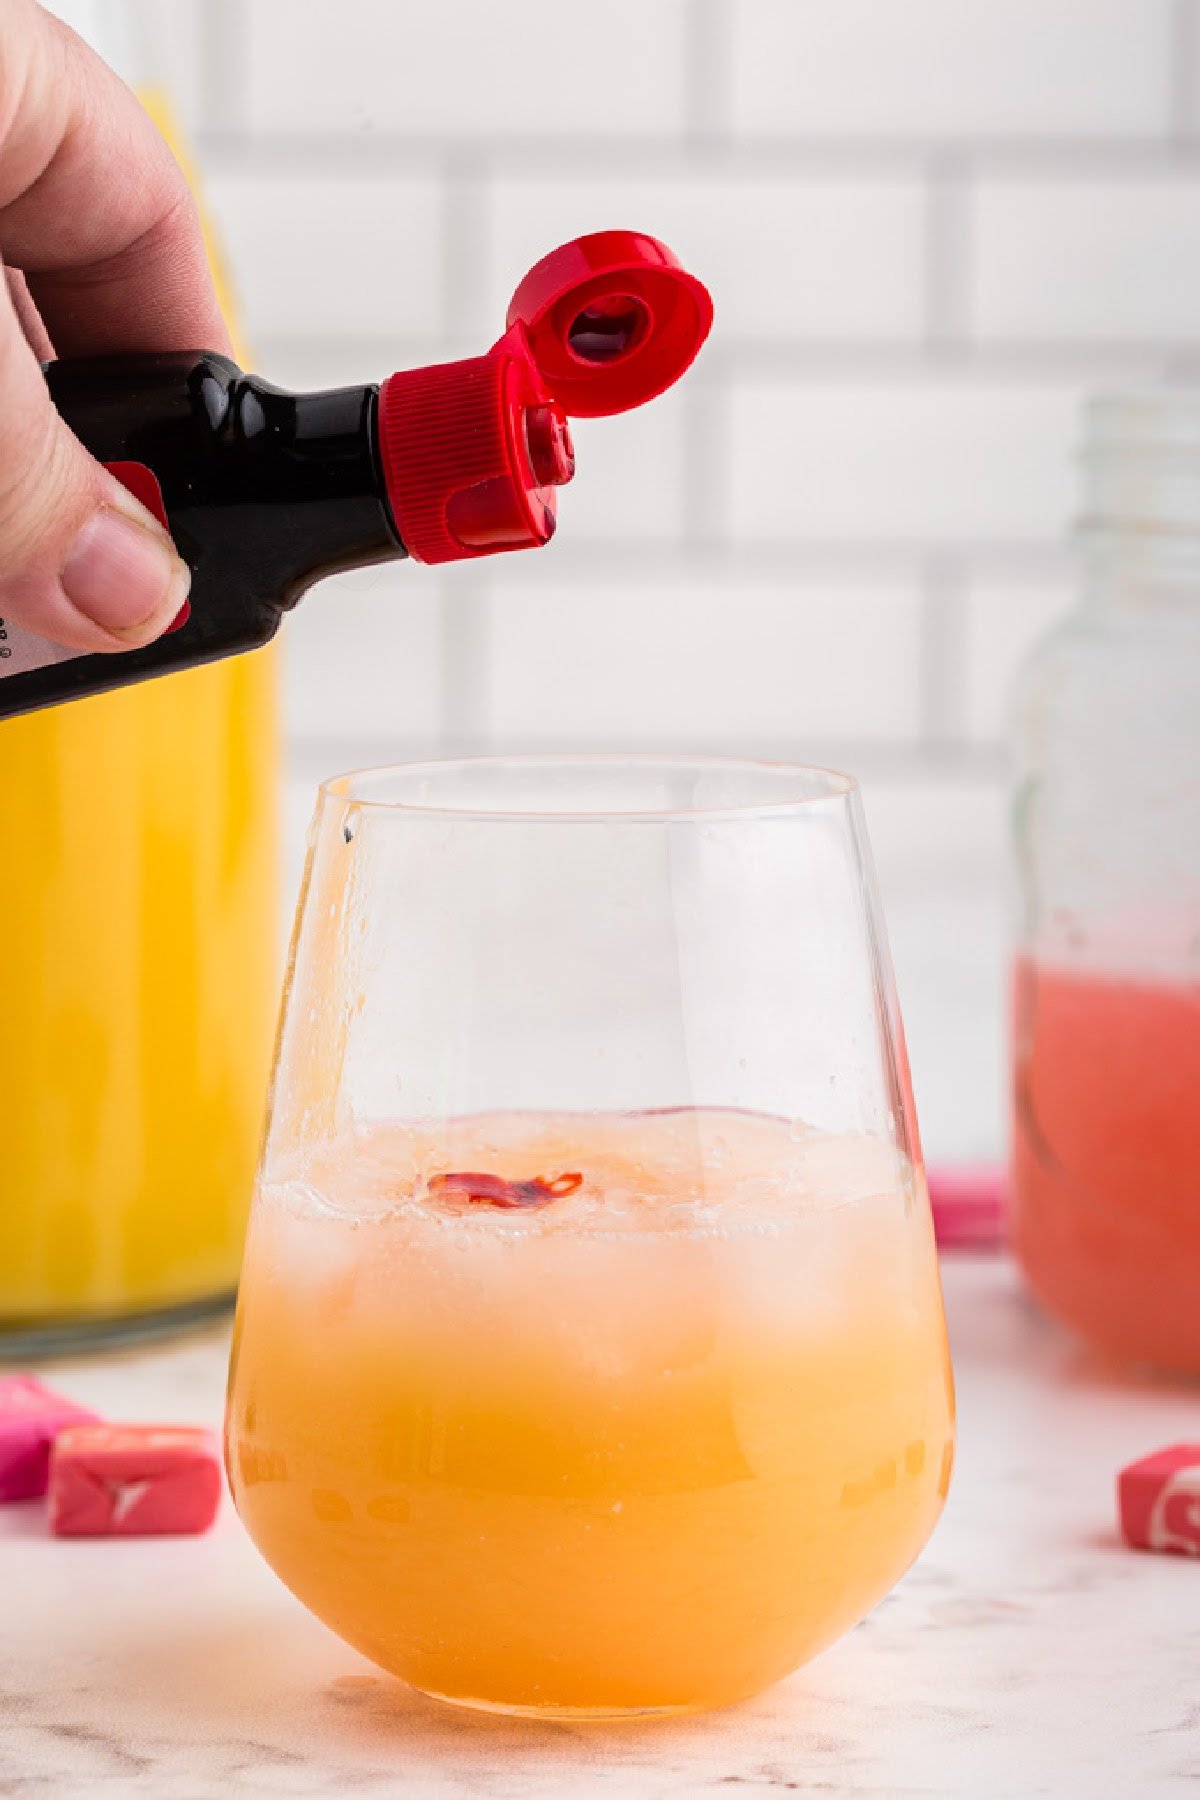 Adding a drop of red food coloring to starburst alcohol drink in stemless wine glass.